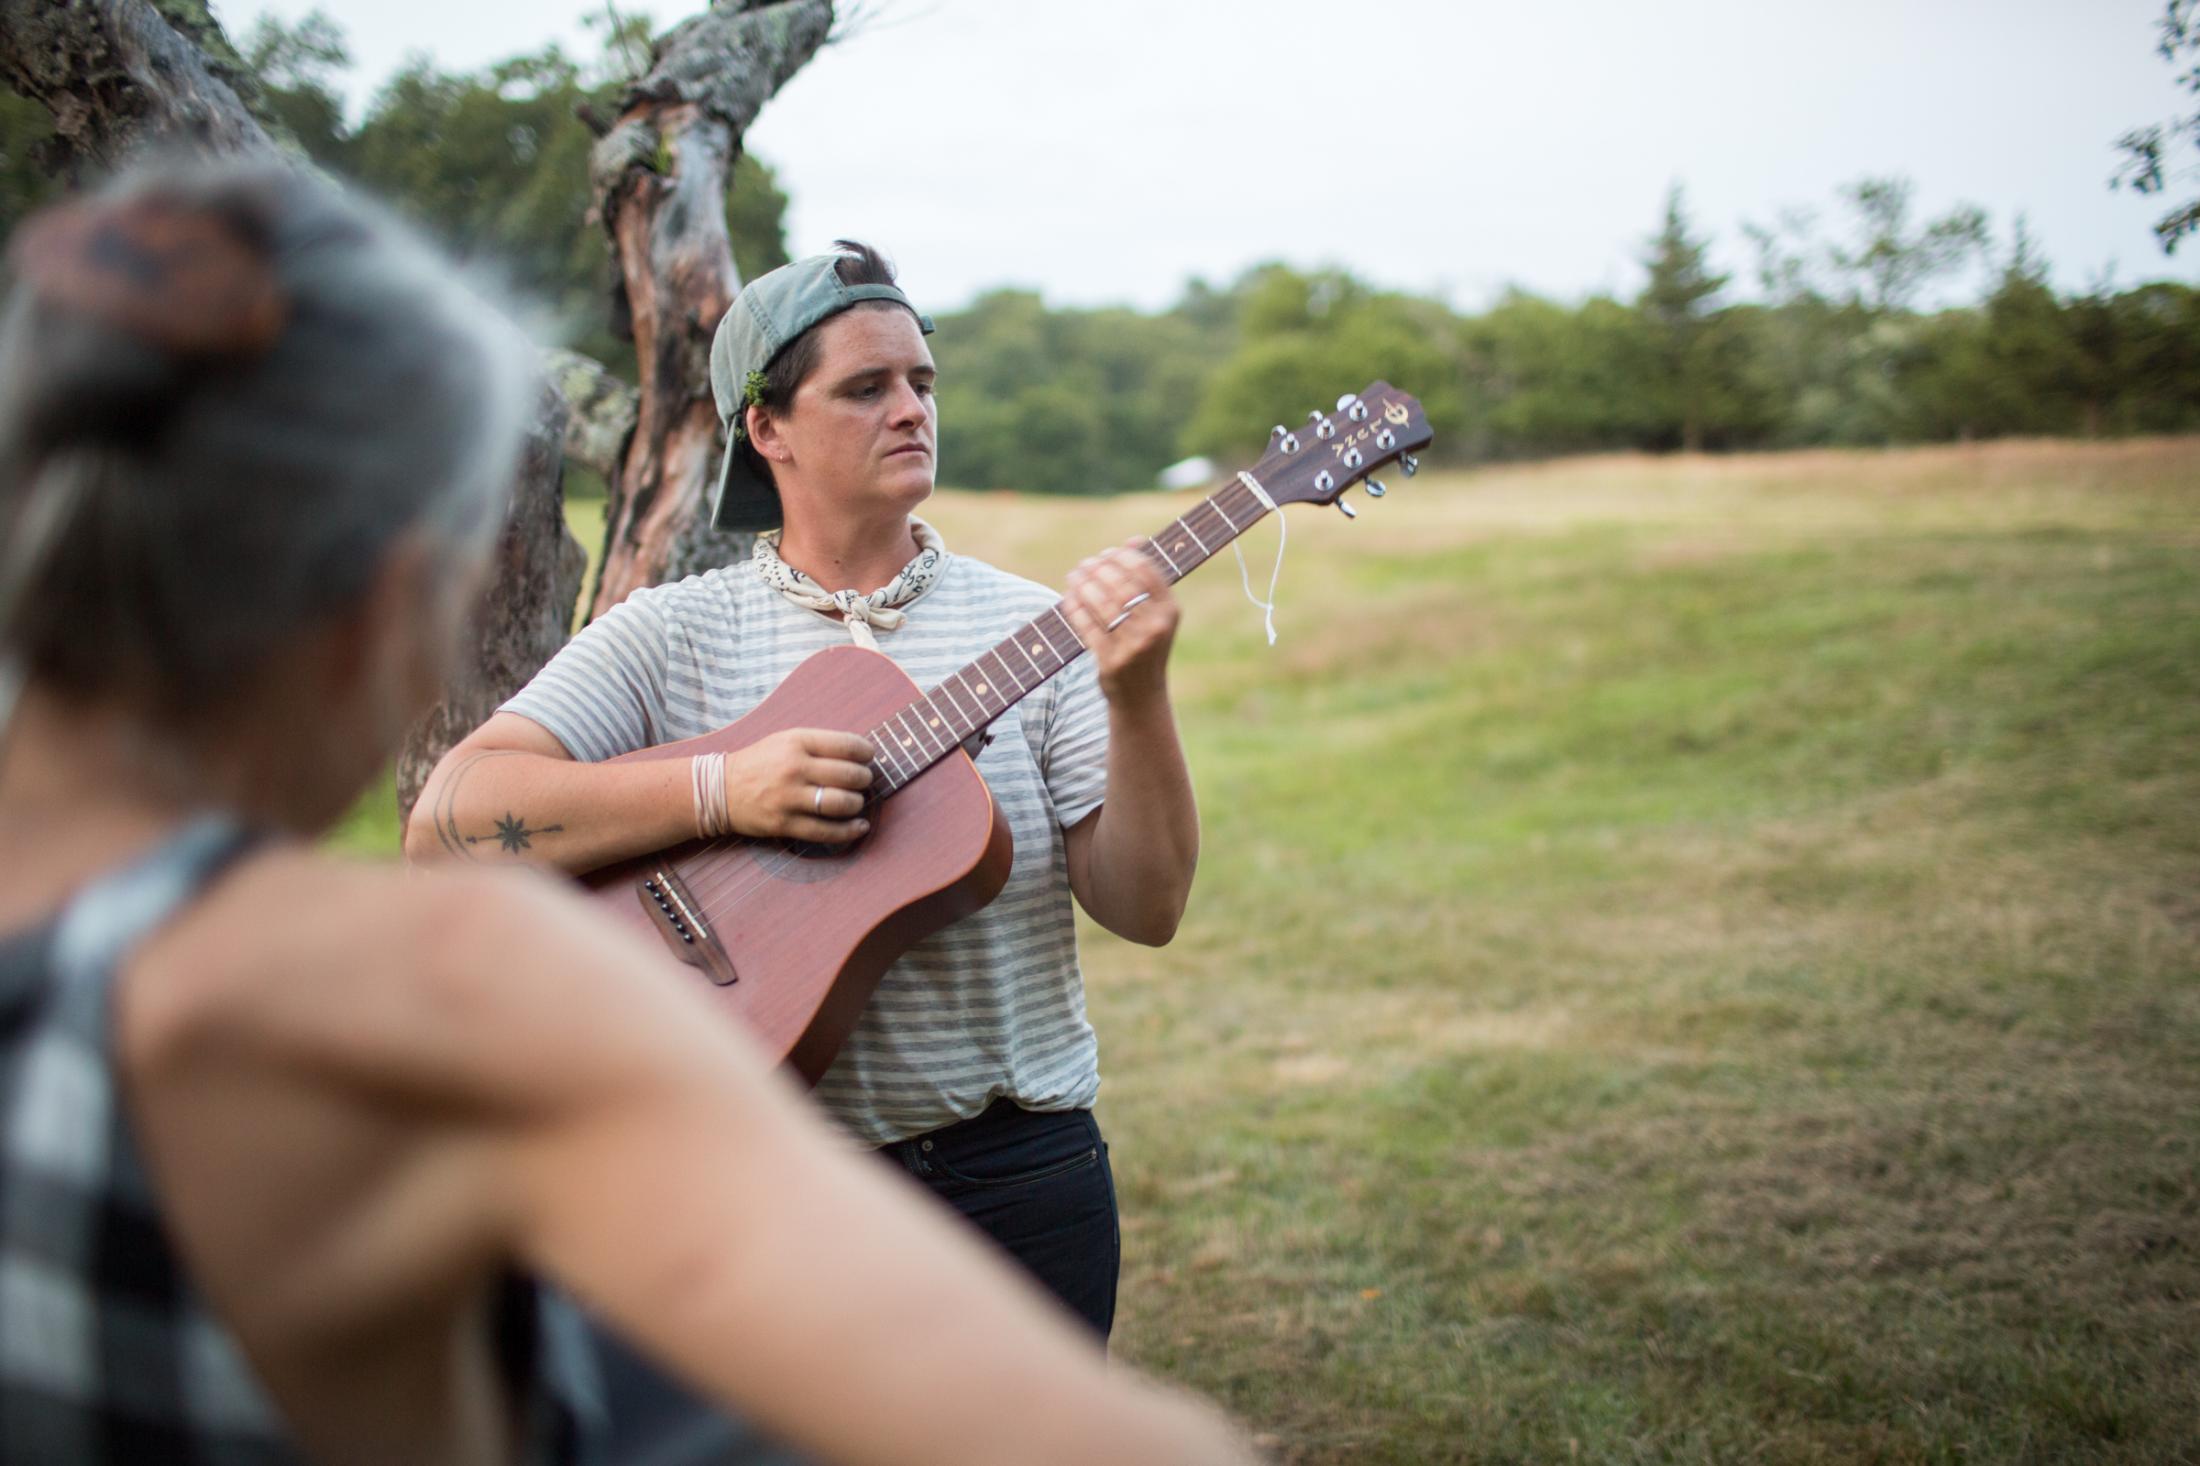 Oh, Farmer - Layton Guenther plays guitar in the Quail Hill Farm orchard